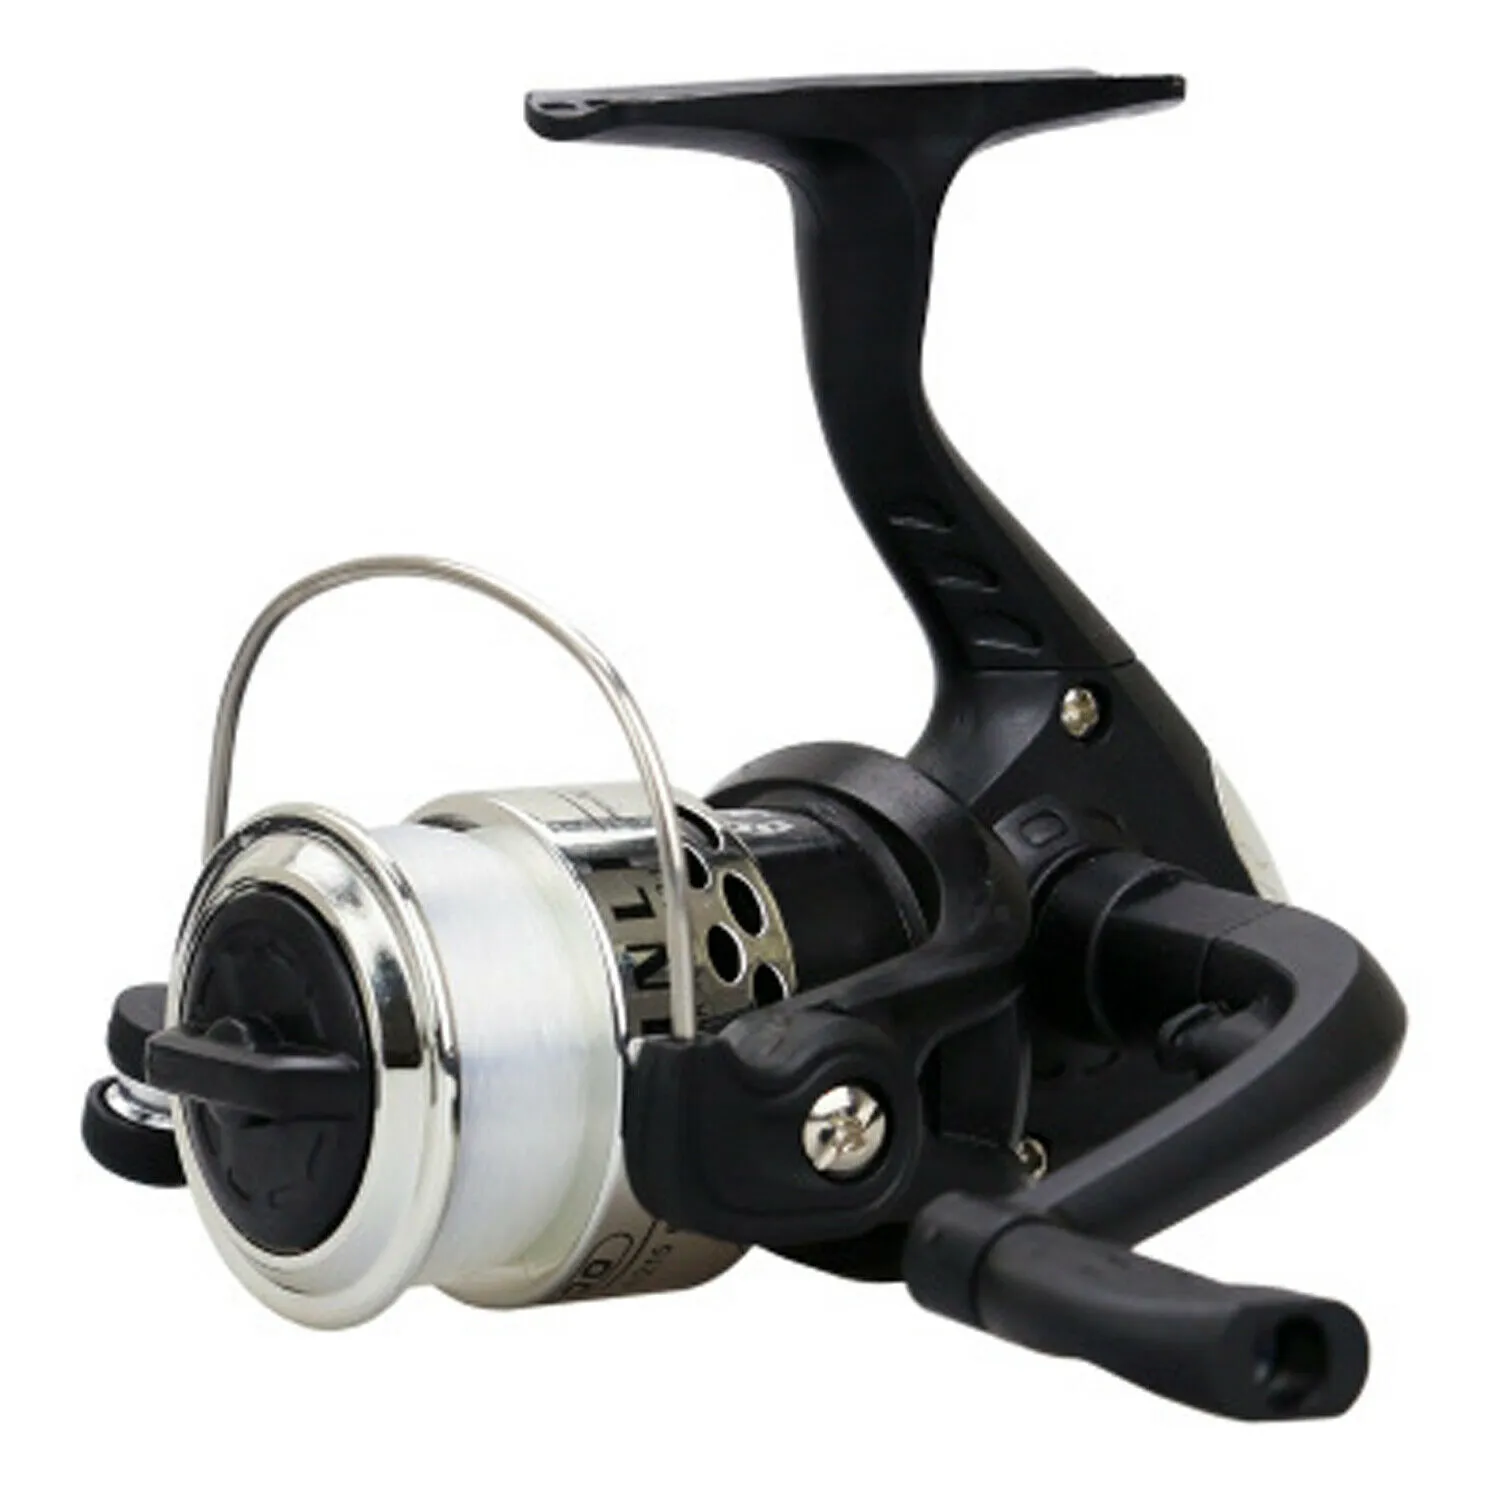 3BB Spinning Fishing Reel With Clear Mono Line Freshwater Saltwater Fishing  Reel China Fishing Tackle Supplier From Enjoyoutdoors, $6.12